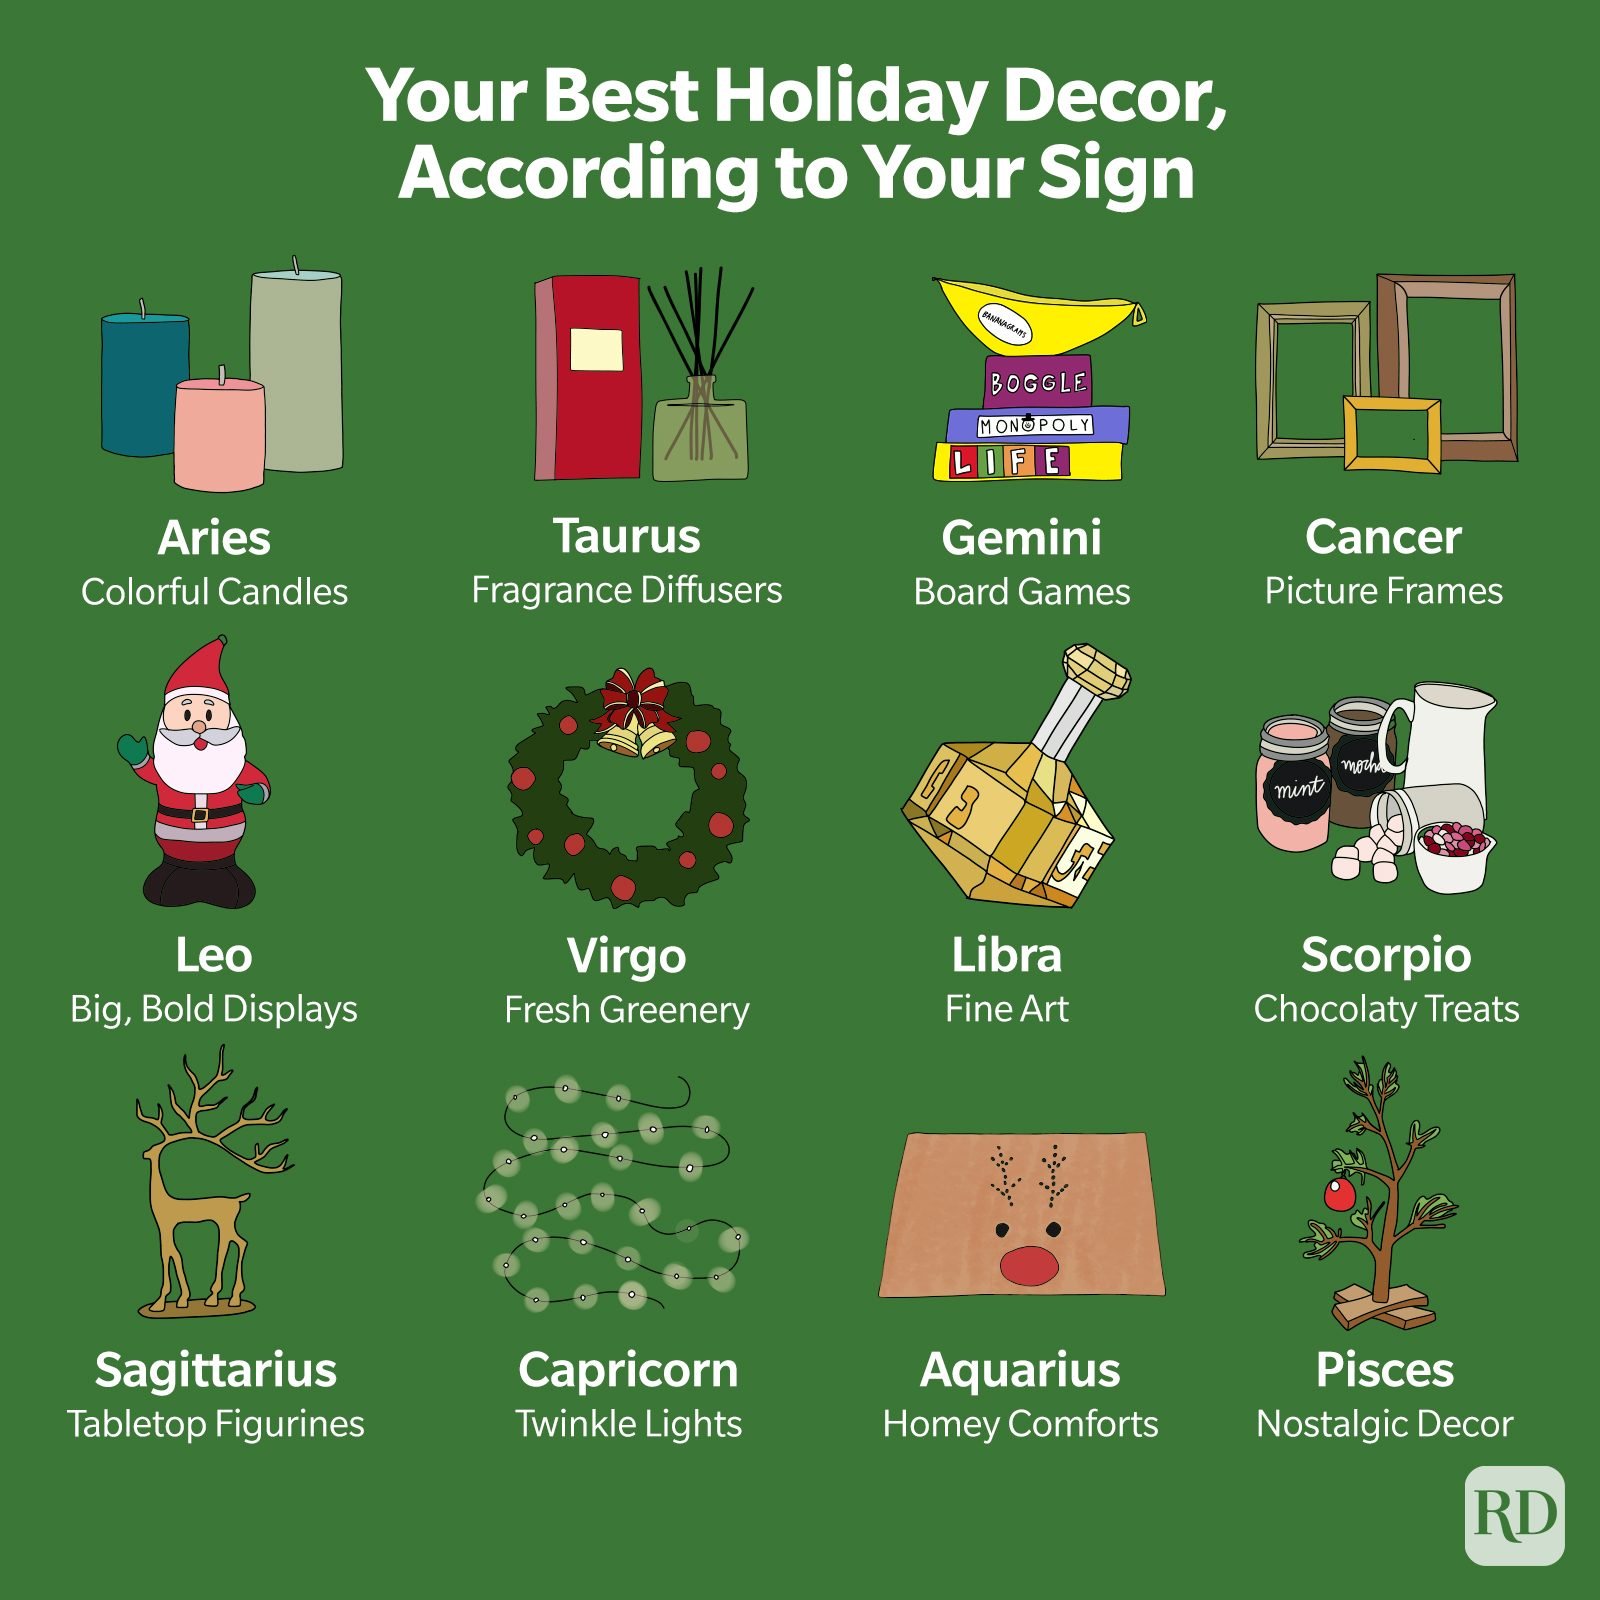 How to Decorate for the Holidays in 2022, Based on Your Zodiac Sign